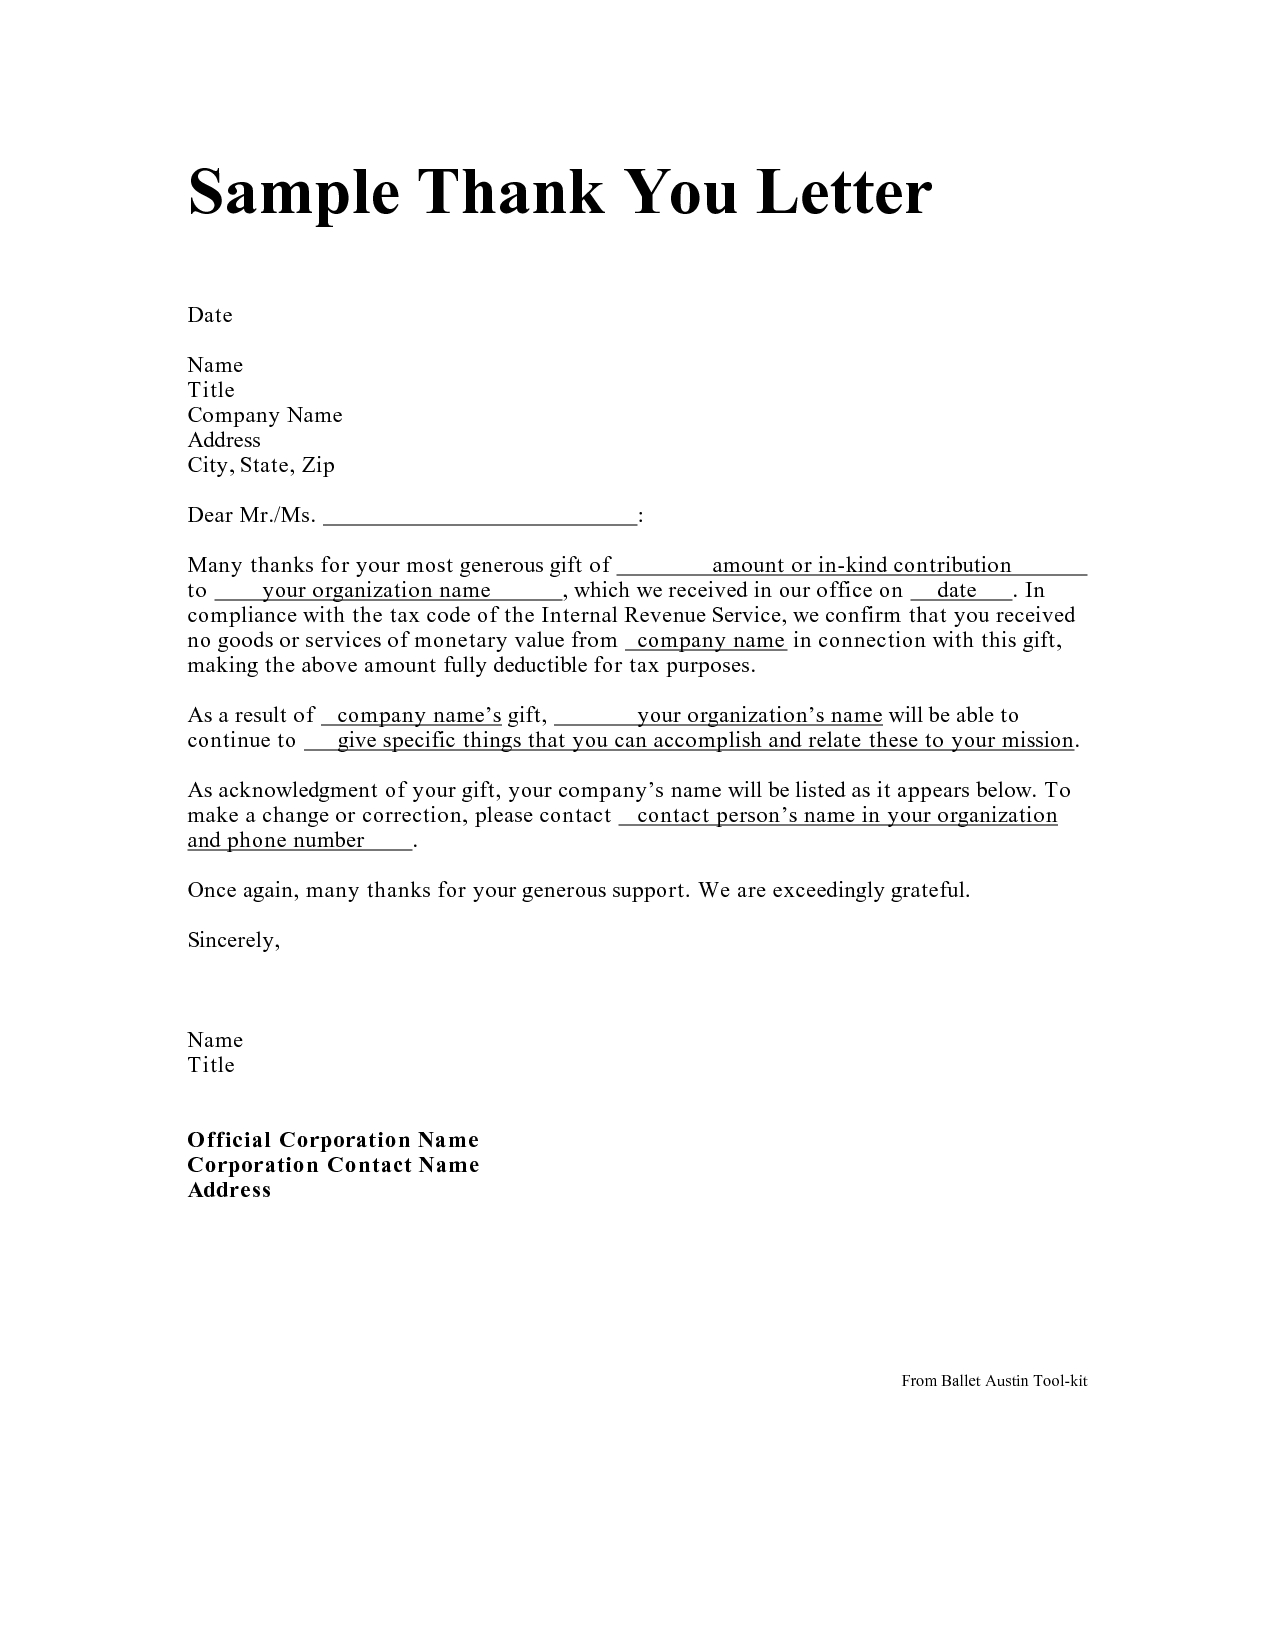 Statement Of Service Letter Template - Personal Thank You Letter Personal Thank You Letter Samples